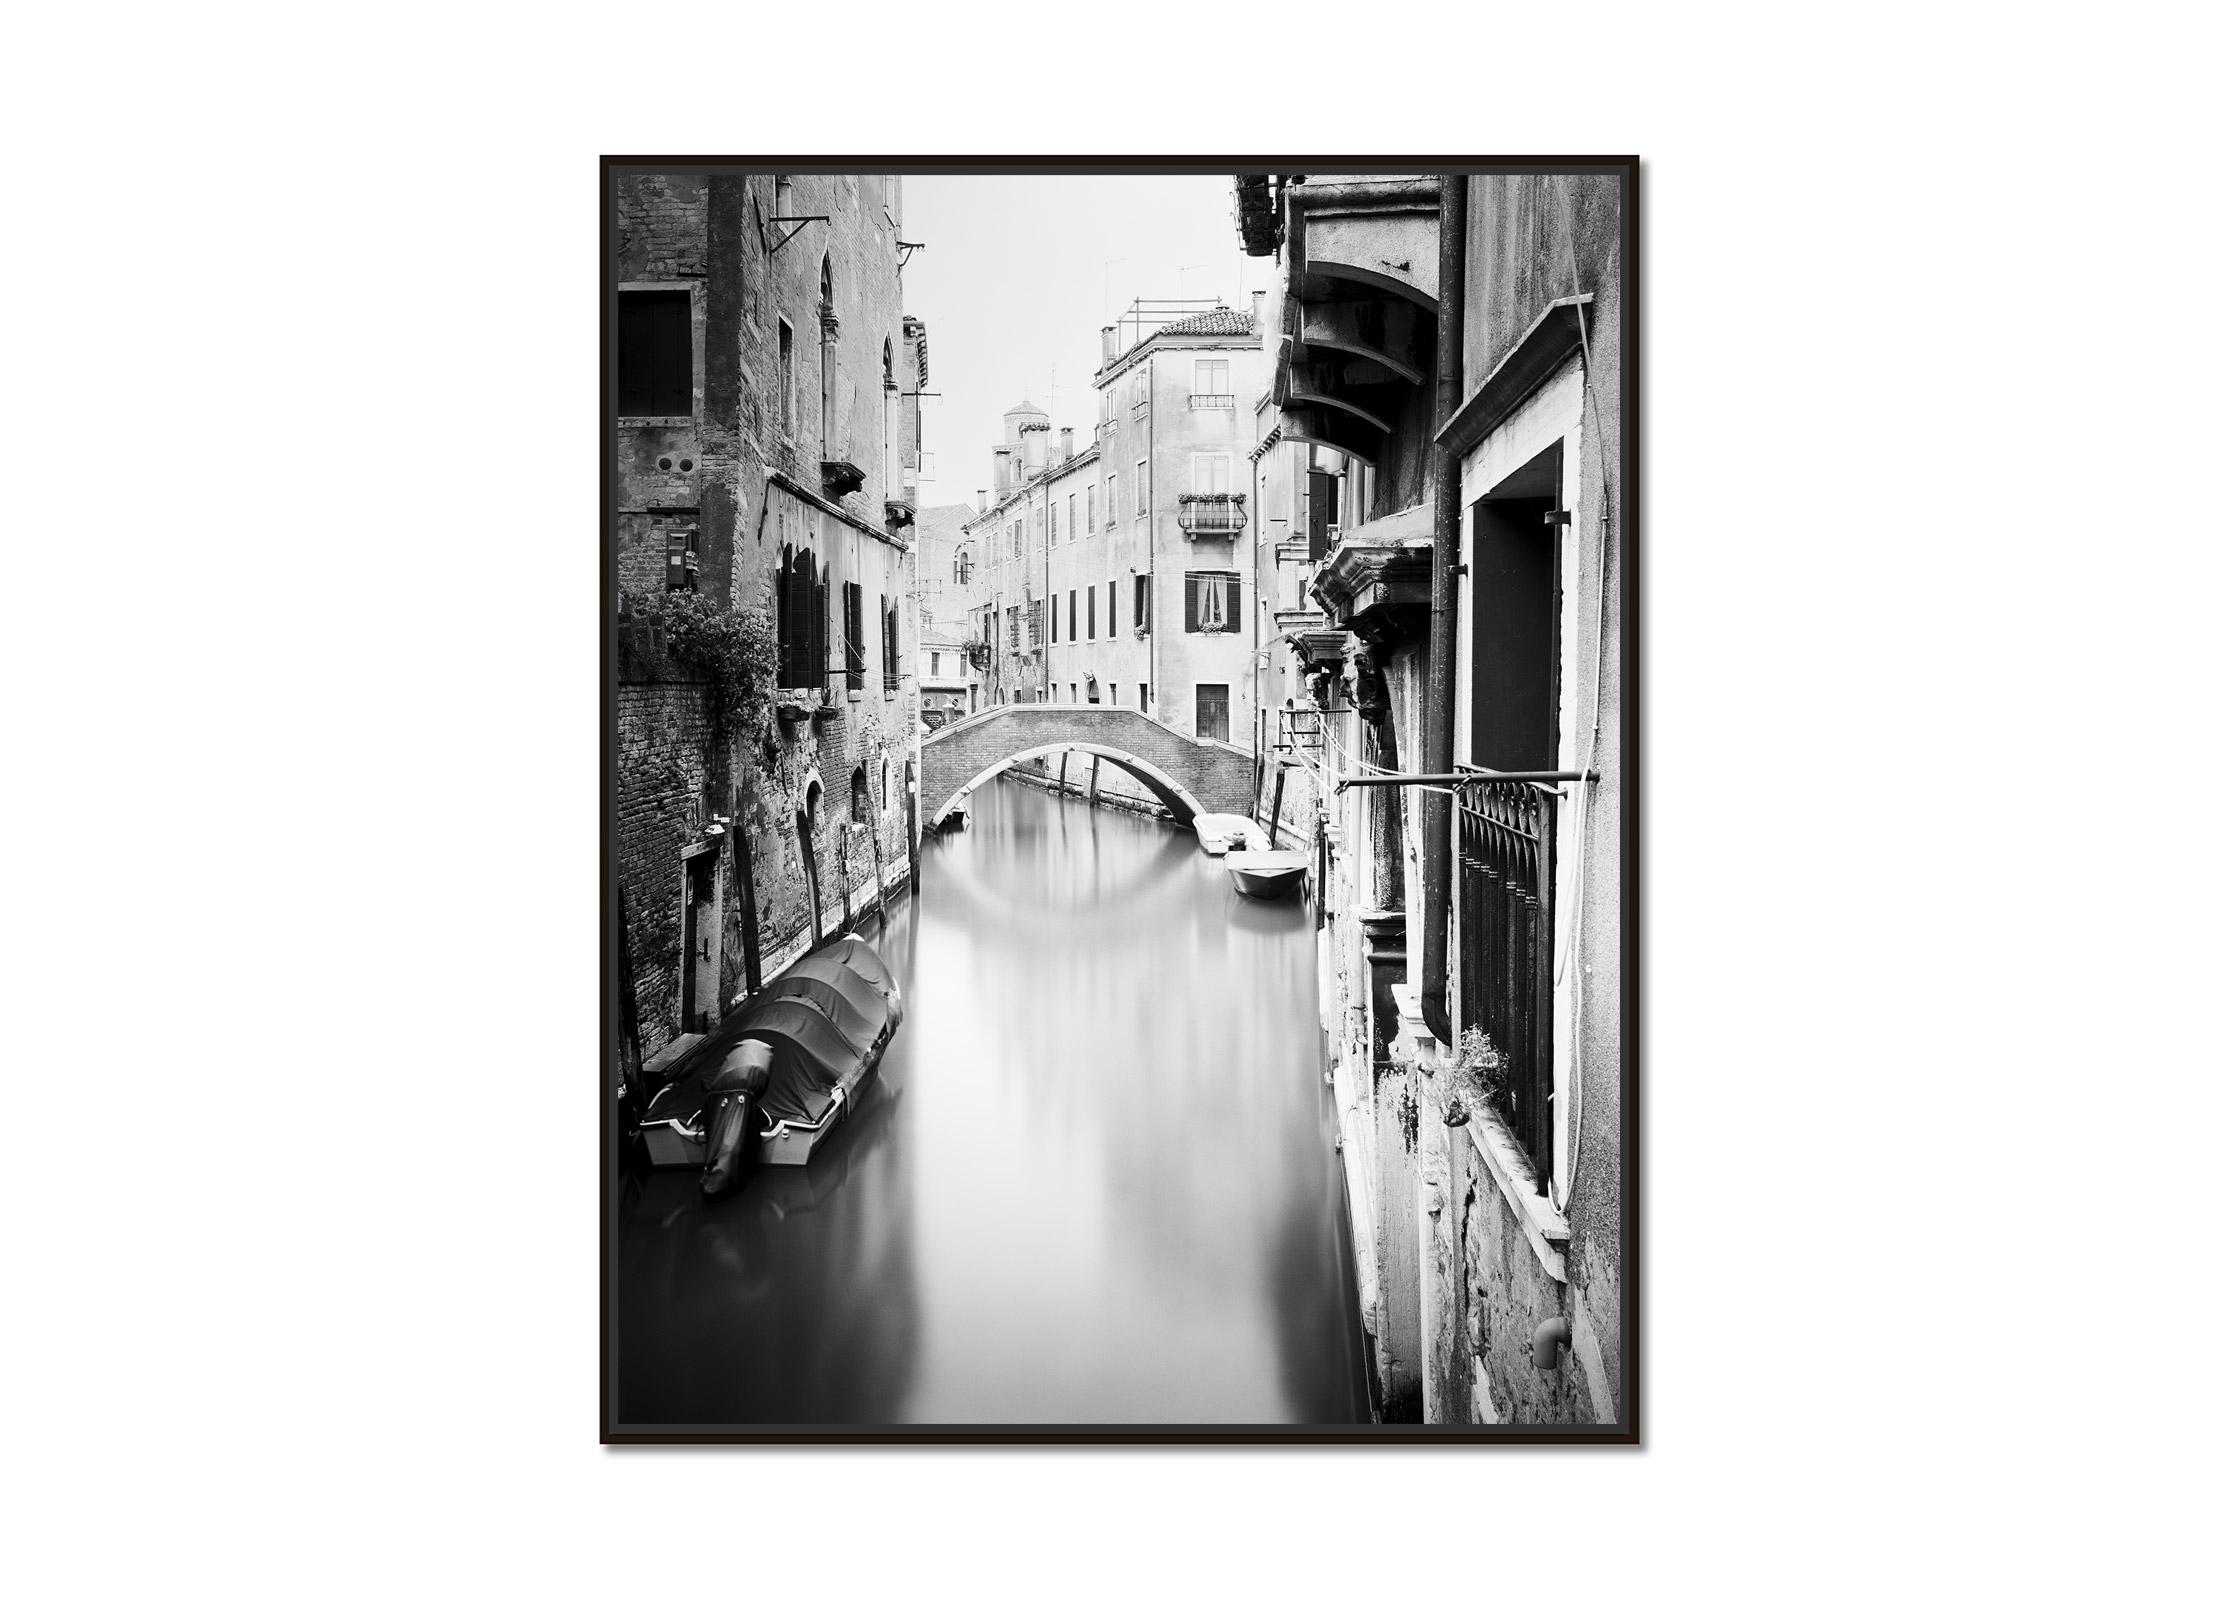 The Bridges of Venice, Italy, black and white fine art photography, landscape - Photograph by Gerald Berghammer